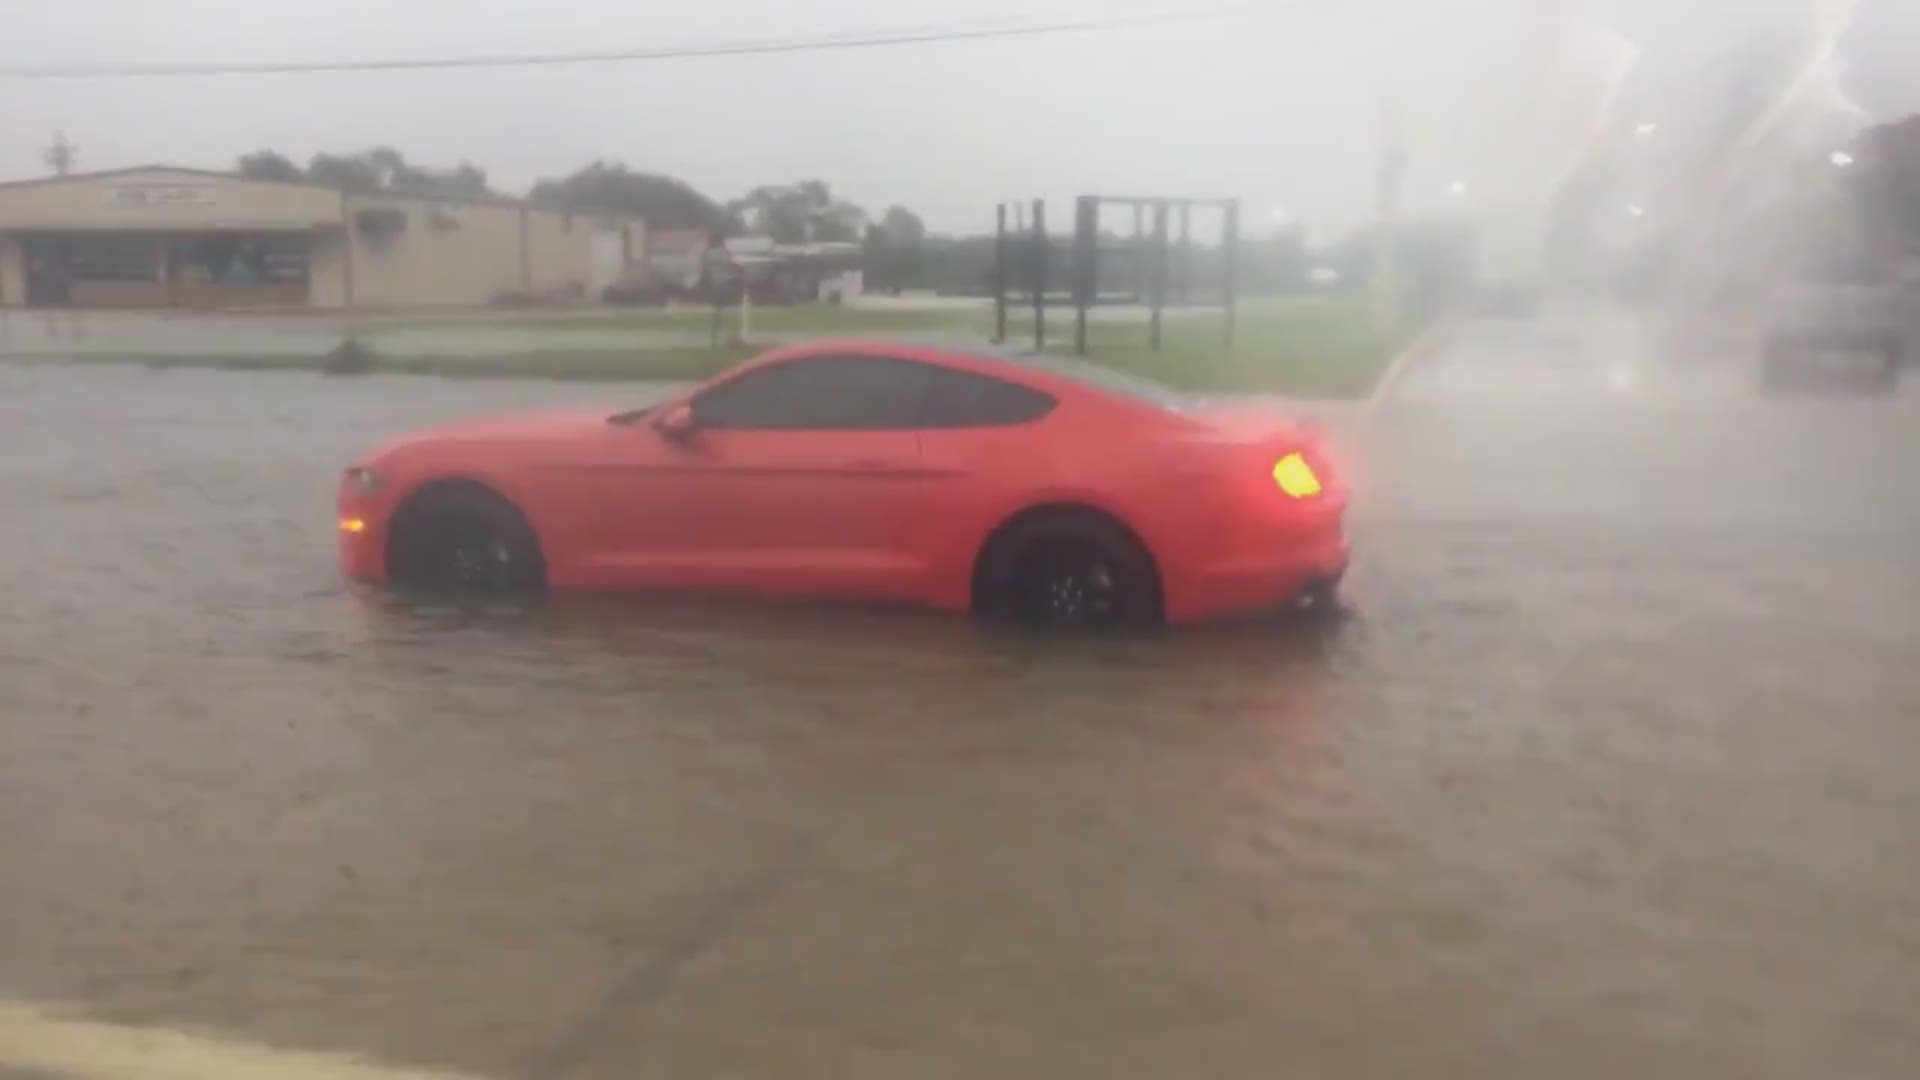 KHOU's Michelle Choi shot this video of flooding caused by Imelda Sept. 19, 2019 along Gulfway Drive in Winnie. “We’re stuck, nowhere to go," drivers told her.